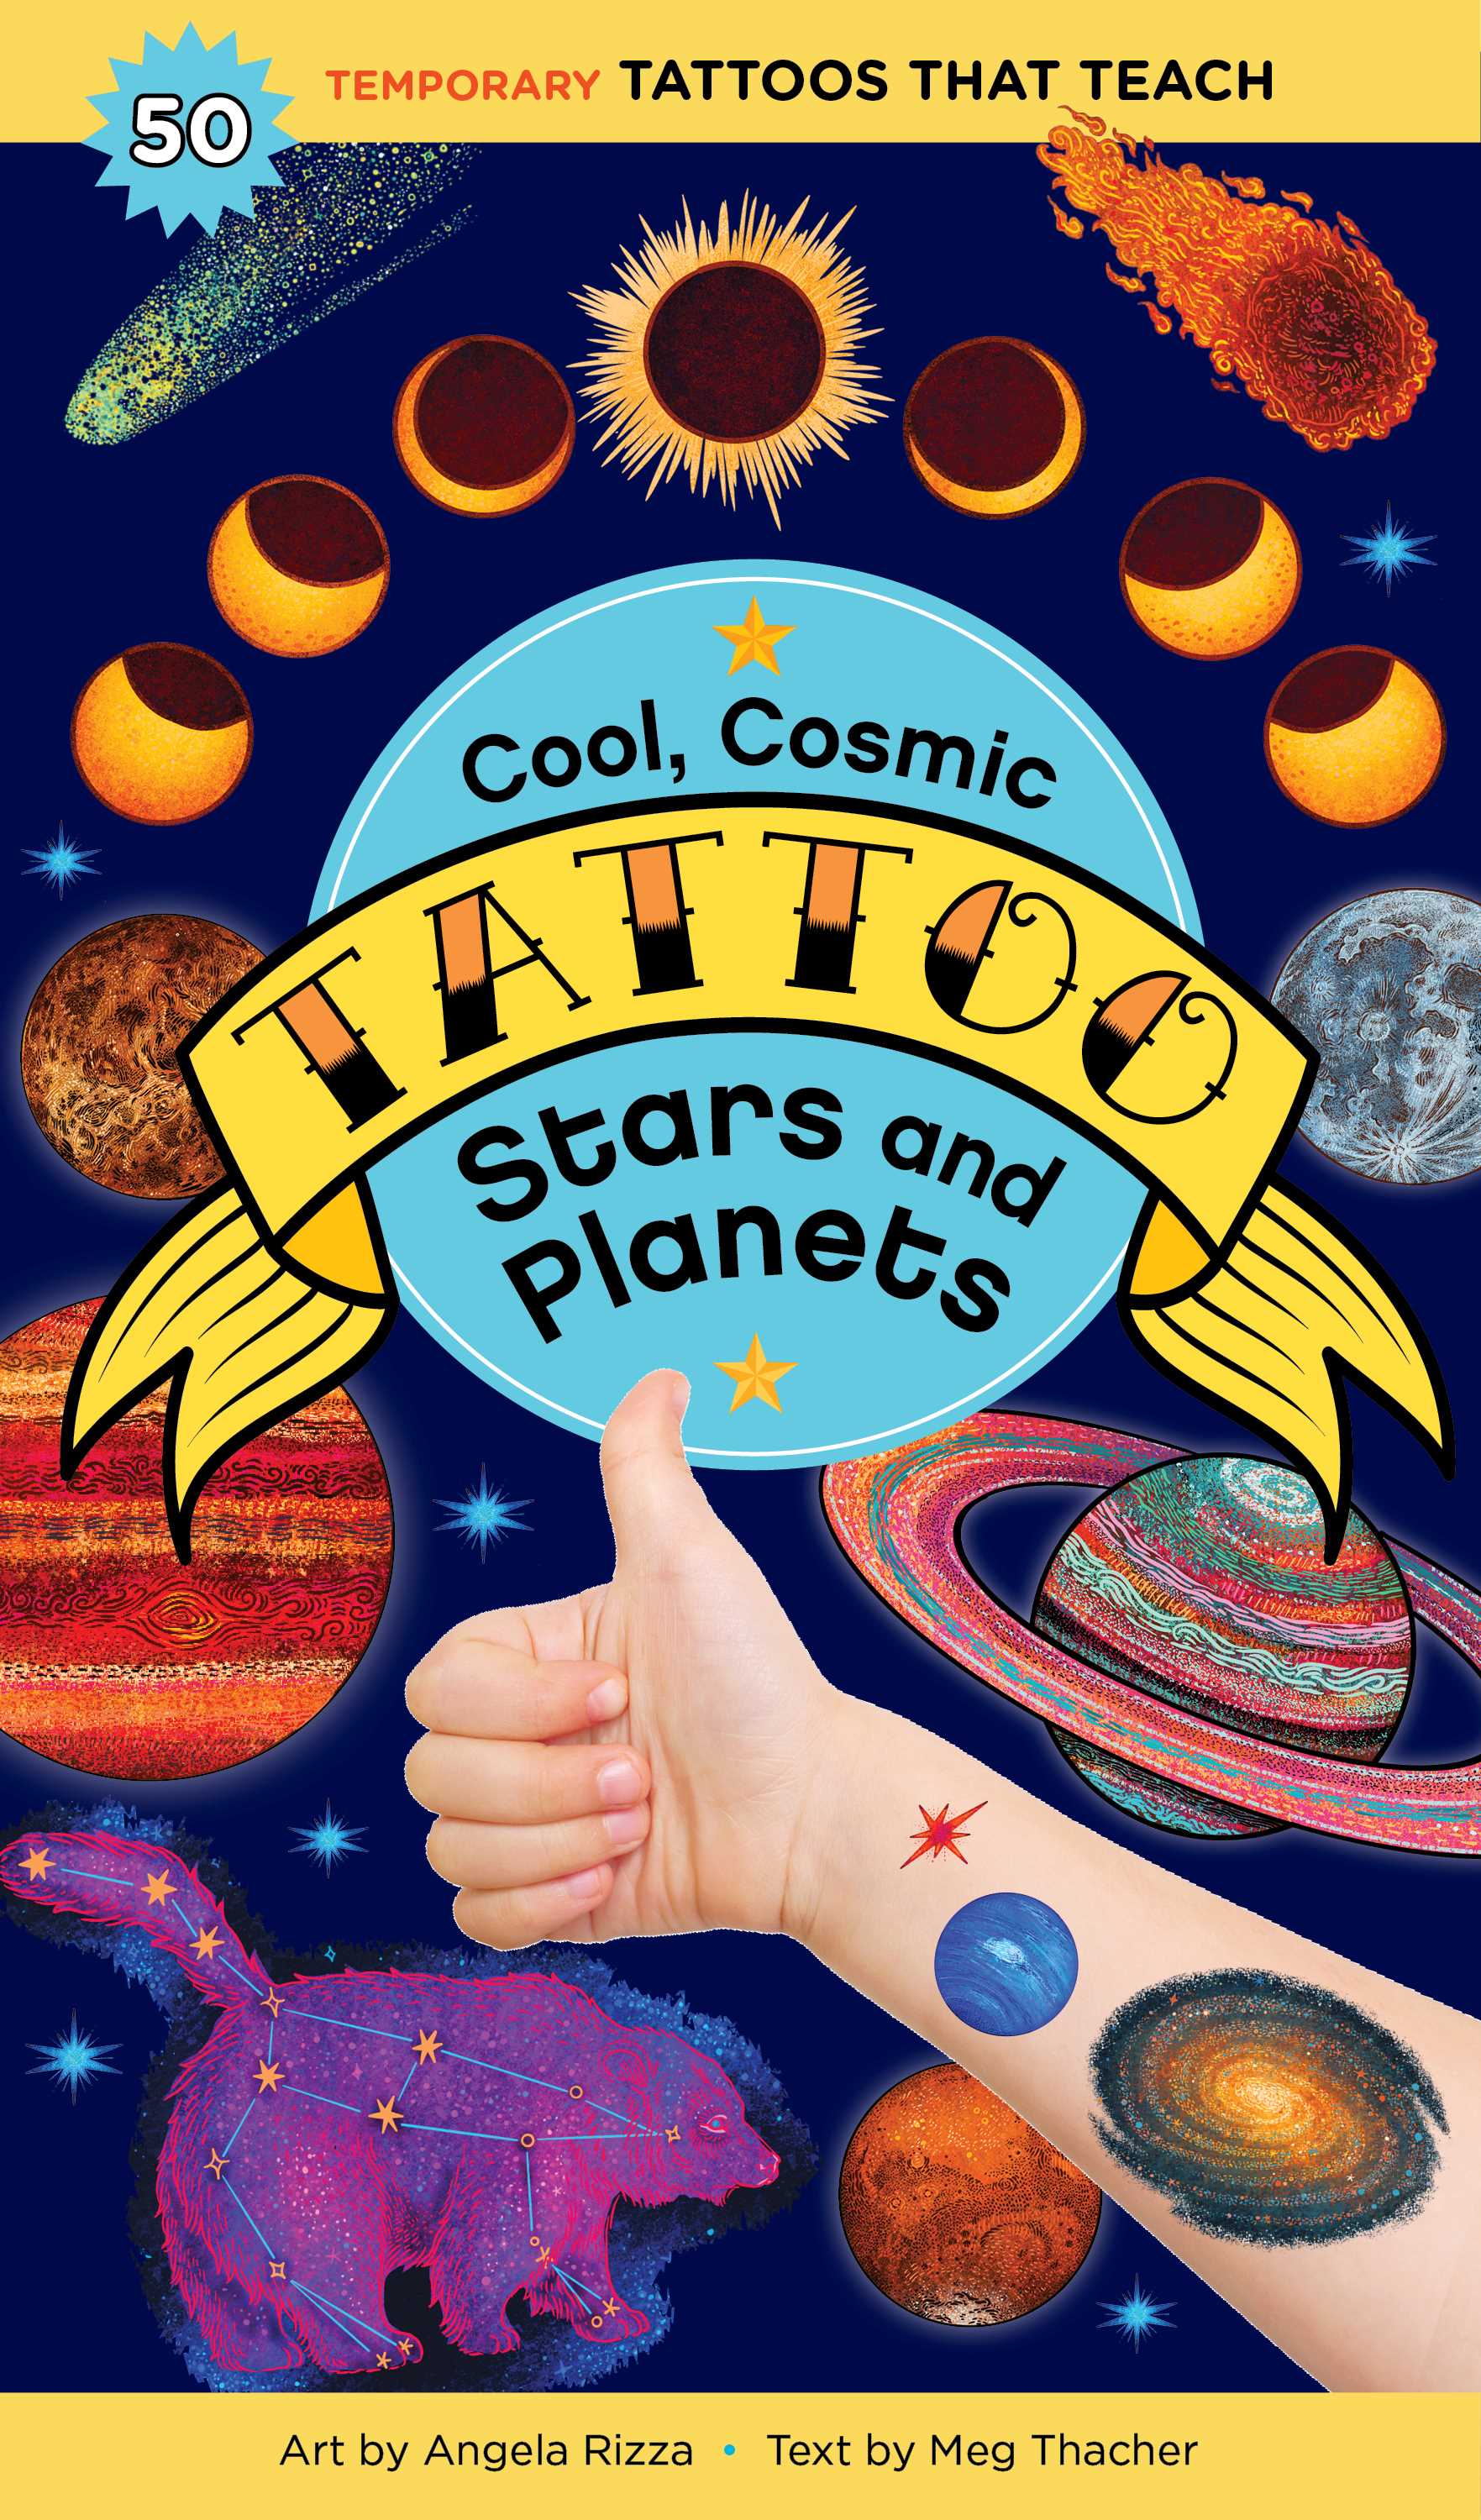 Cool, Cosmic Tattoo Stars and Planets (Tattoos That Teach)